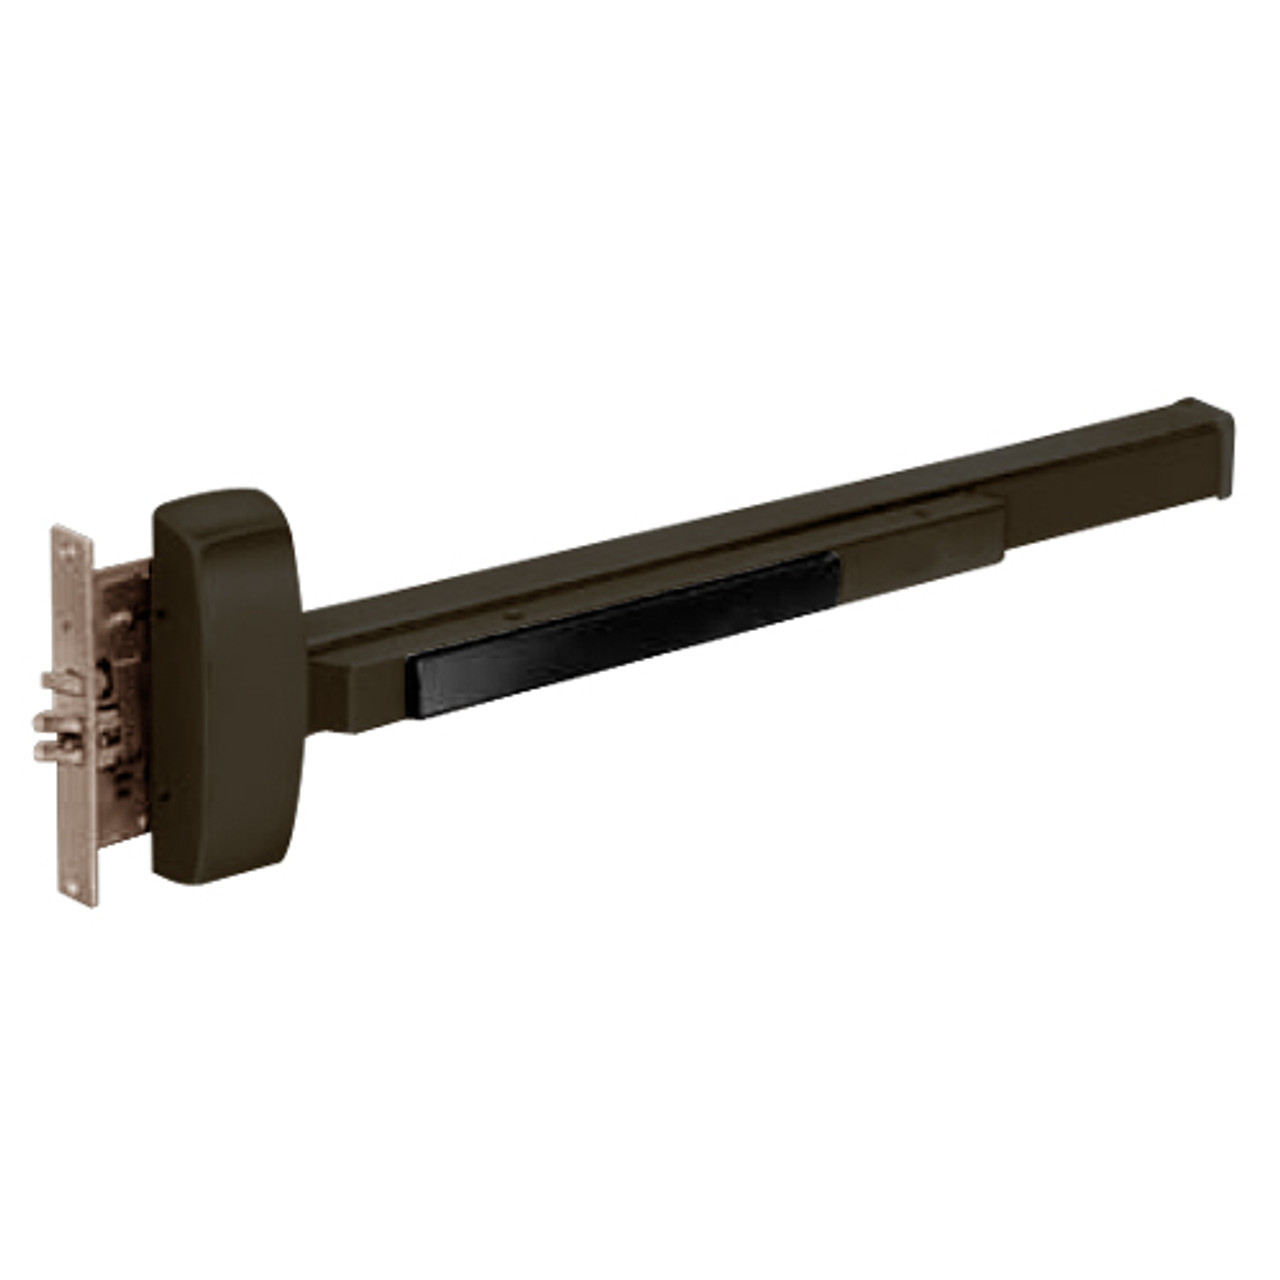 12-8910J-LHR-10B Sargent 80 Series Exit Only Fire Rated Mortise Lock Exit Device in Oil Rubbed Bronze